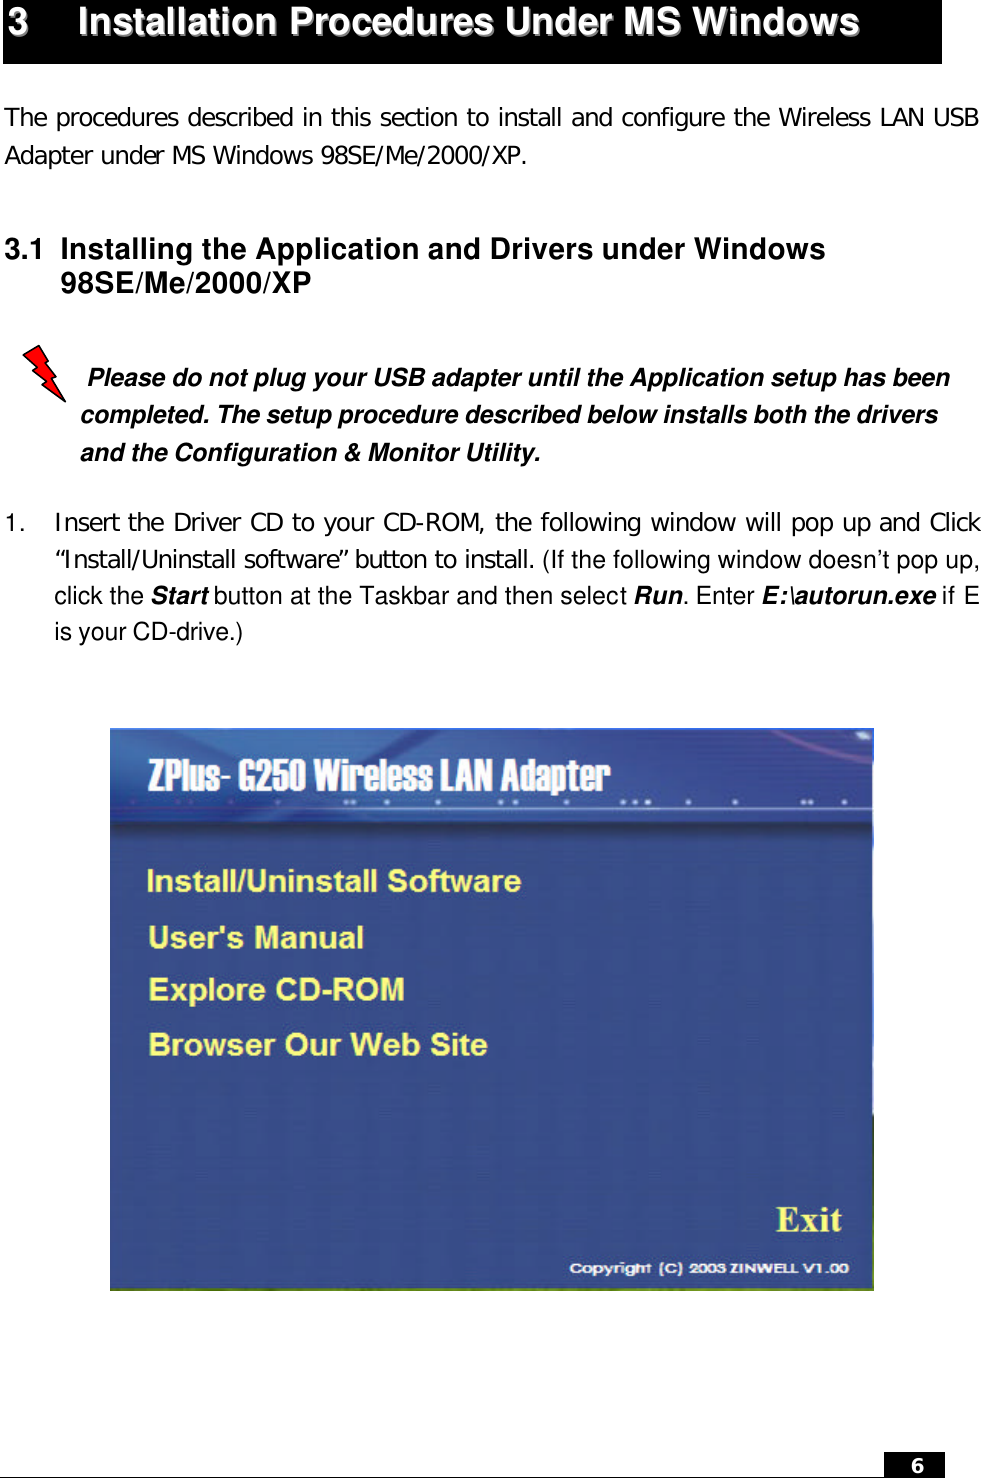  6   33  IInnssttaallllaattiioonn  PPrroocceedduurreess  UUnnddeerr  MMSS  WWiinnddoowwss   The procedures described in this section to install and configure the Wireless LAN USB Adapter under MS Windows 98SE/Me/2000/XP.  3.1 Installing the Application and Drivers under Windows 98SE/Me/2000/XP   Please do not plug your USB adapter until the Application setup has been completed. The setup procedure described below installs both the drivers and the Configuration &amp; Monitor Utility.  1. Insert the Driver CD to your CD-ROM, the following window will pop up and Click “Install/Uninstall software” button to install. (If the following window doesn’t pop up, click the Start button at the Taskbar and then select Run. Enter E:\autorun.exe if E is your CD-drive.)      